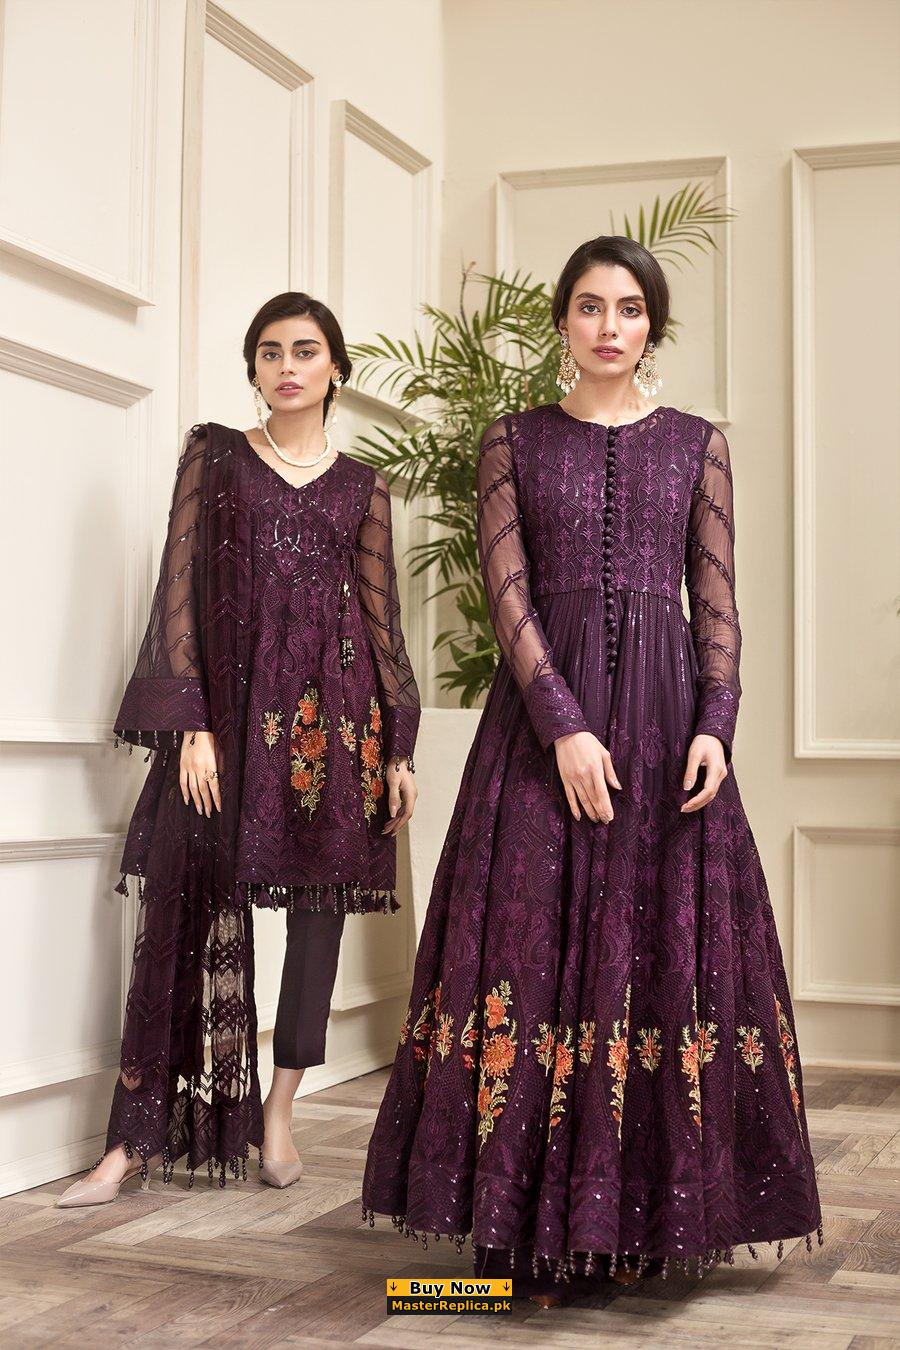 Indian Pakistani Dress For Women Embroidered Net Semi Stitched Anarkali Gown  | eBay